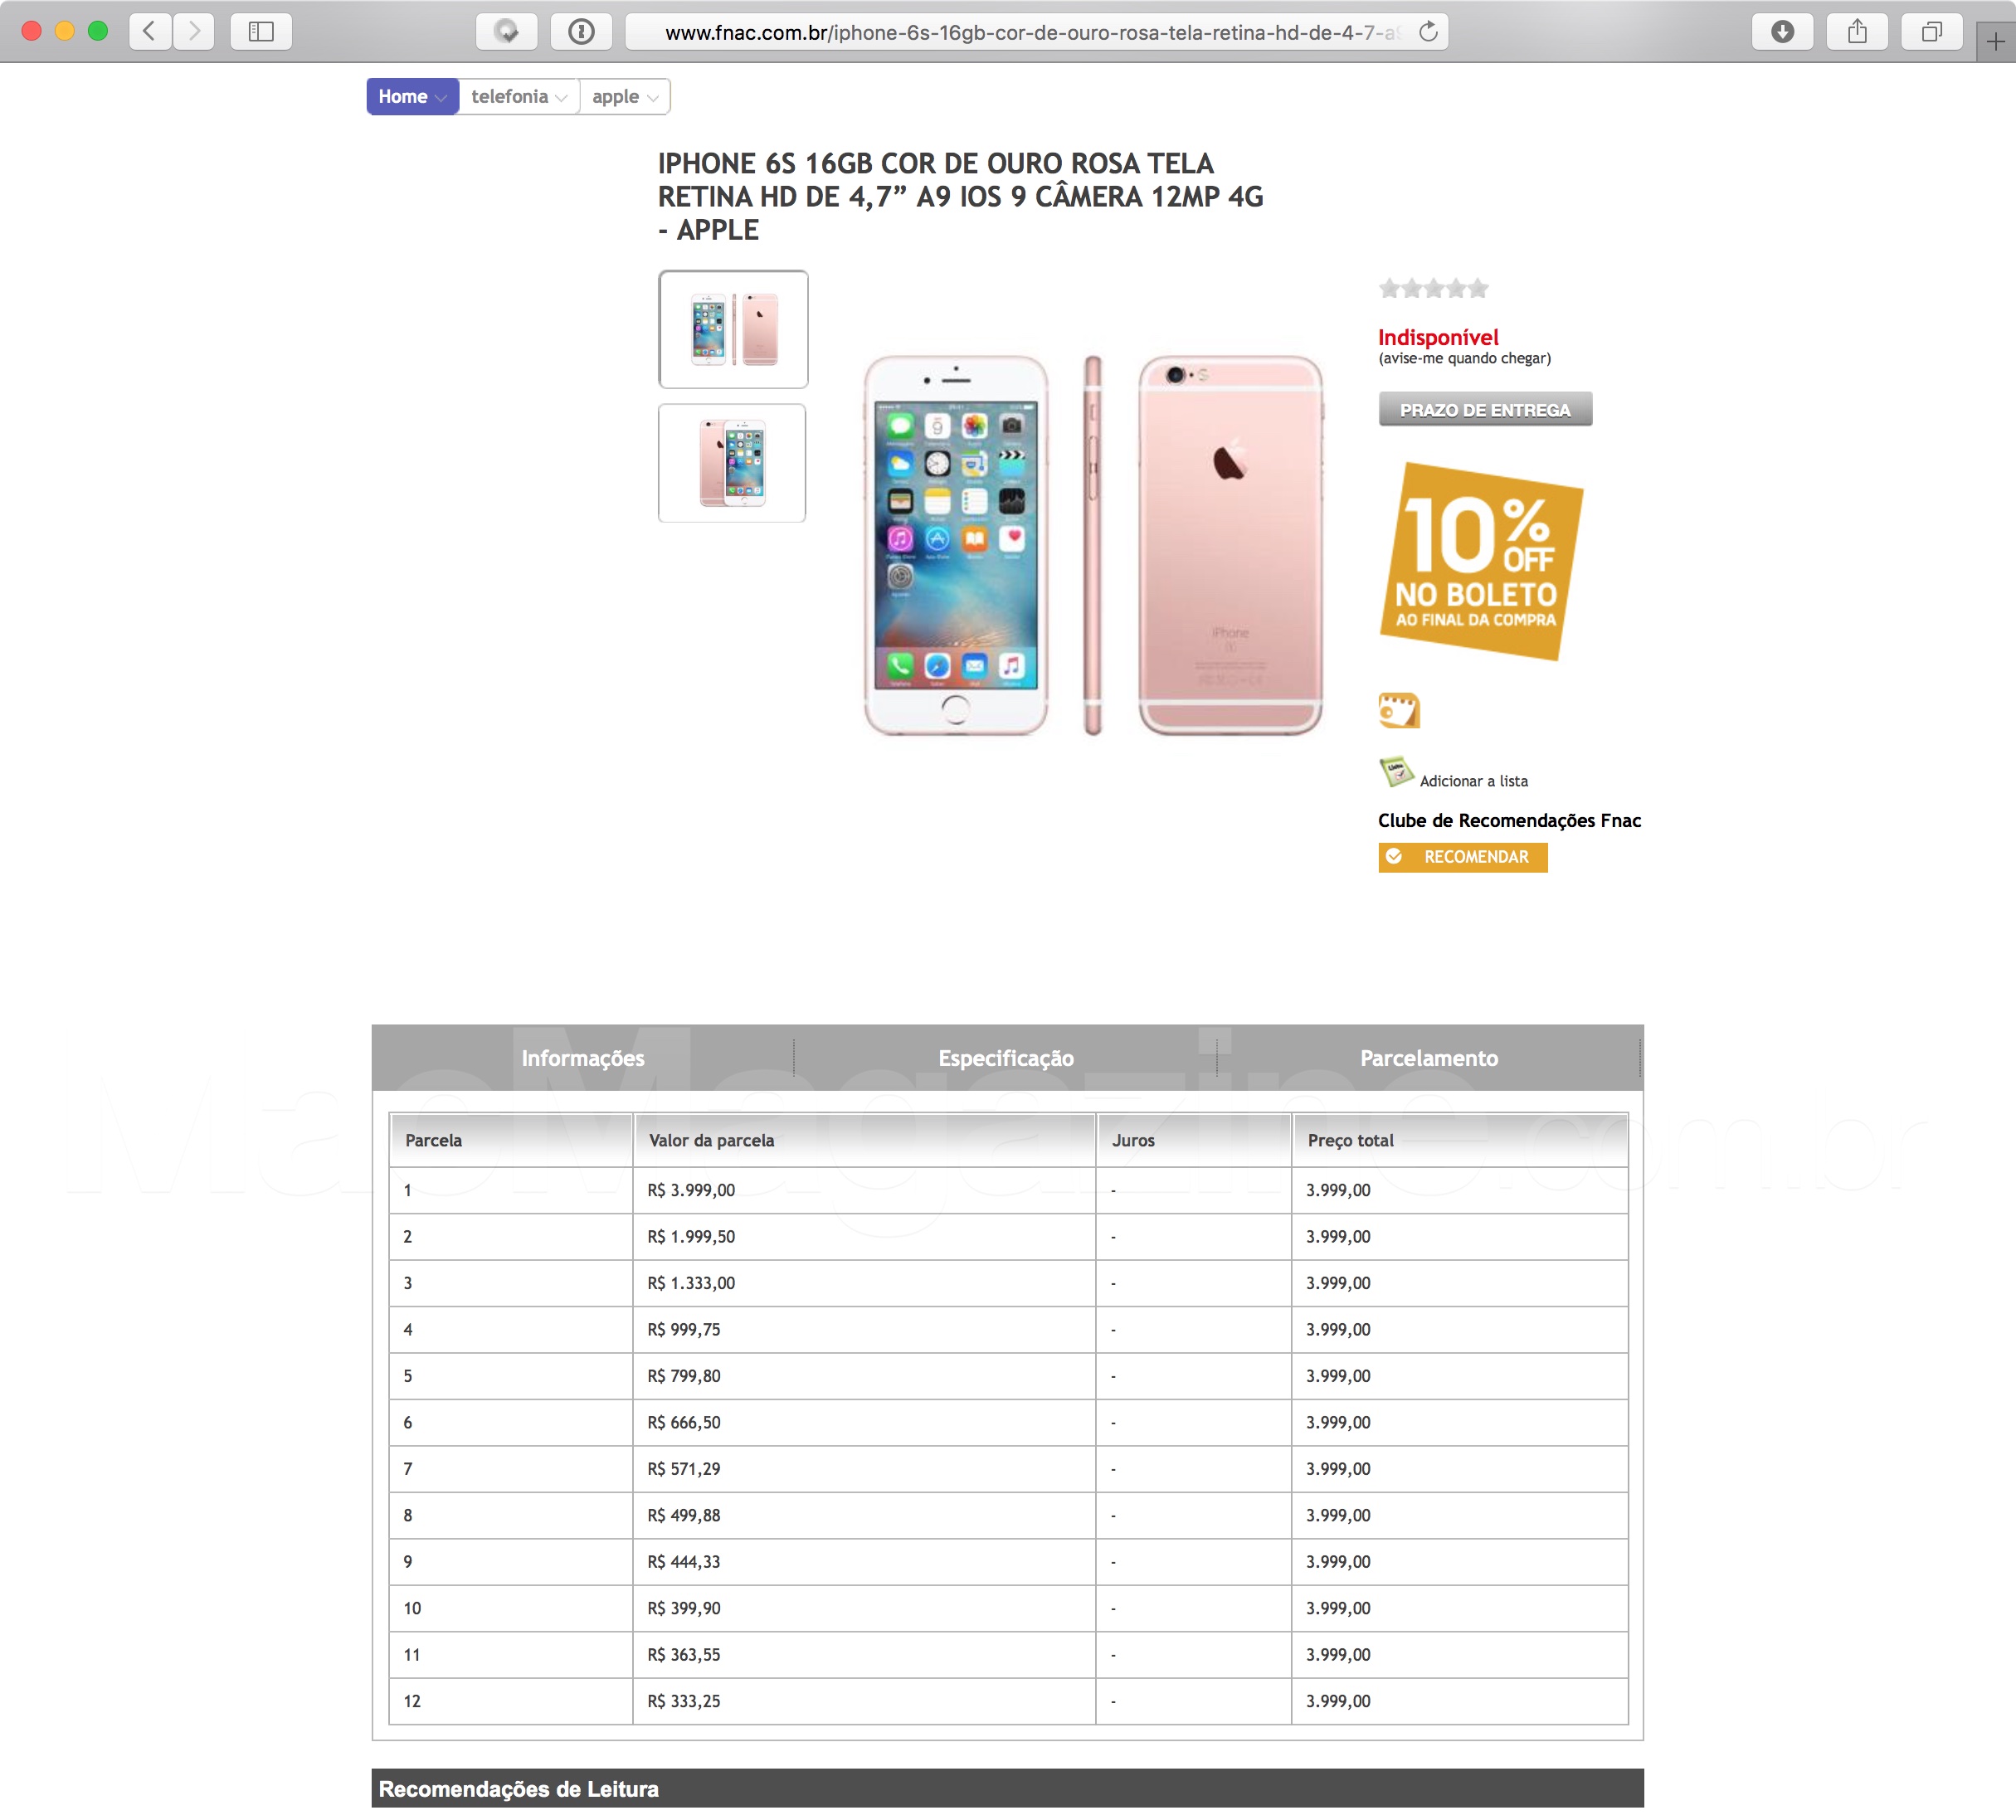 Fnac leaks the prices of iPhones 6s and 6s Plus